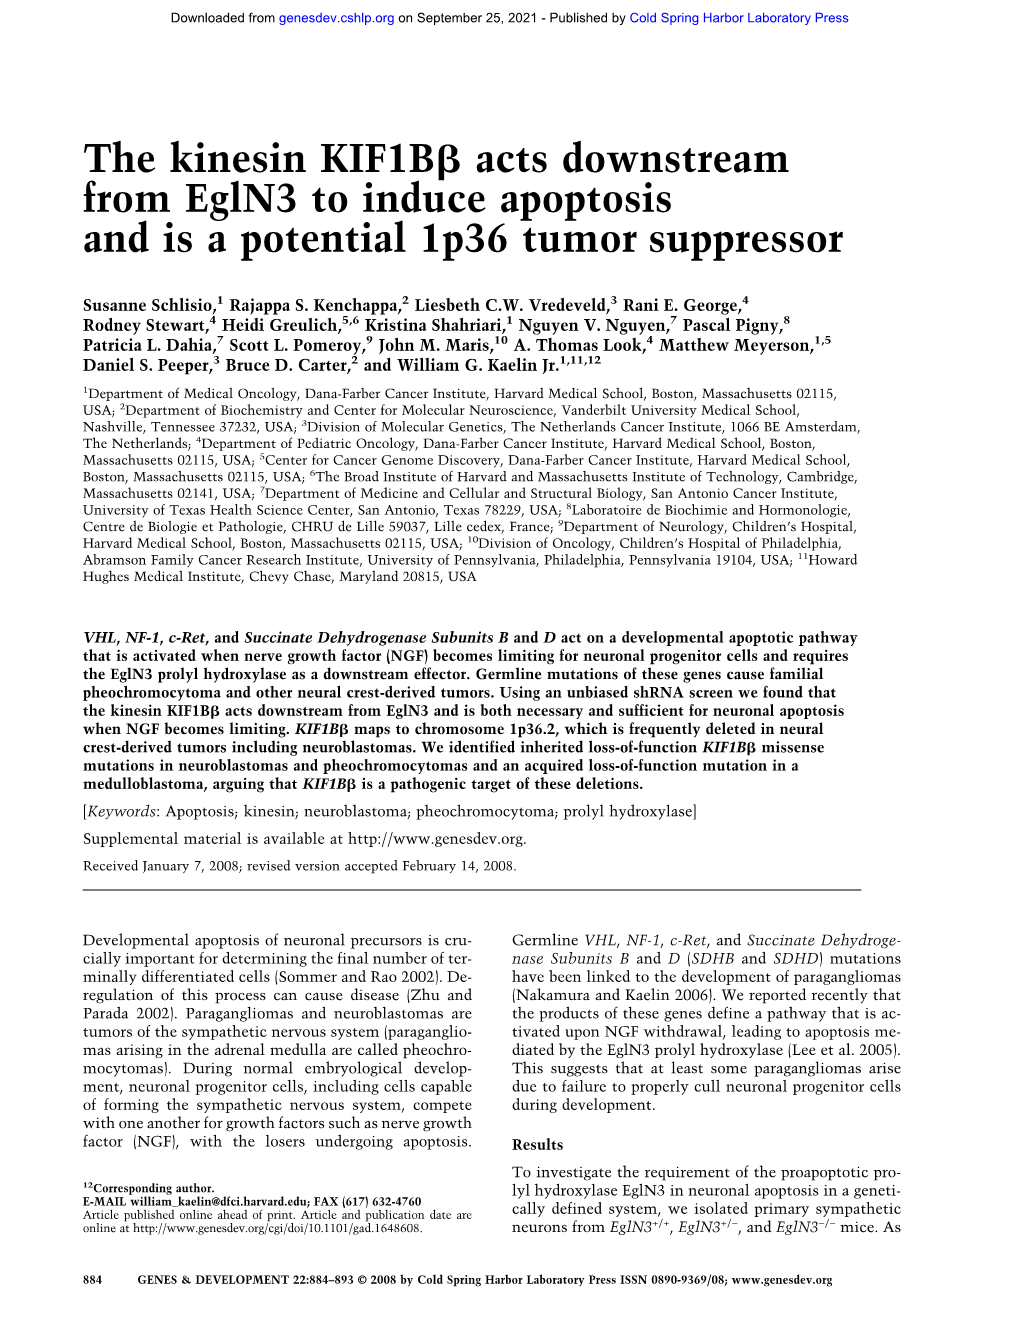 The Kinesin KIF1BЯ Acts Downstream from Egln3 to Induce Apoptosis And